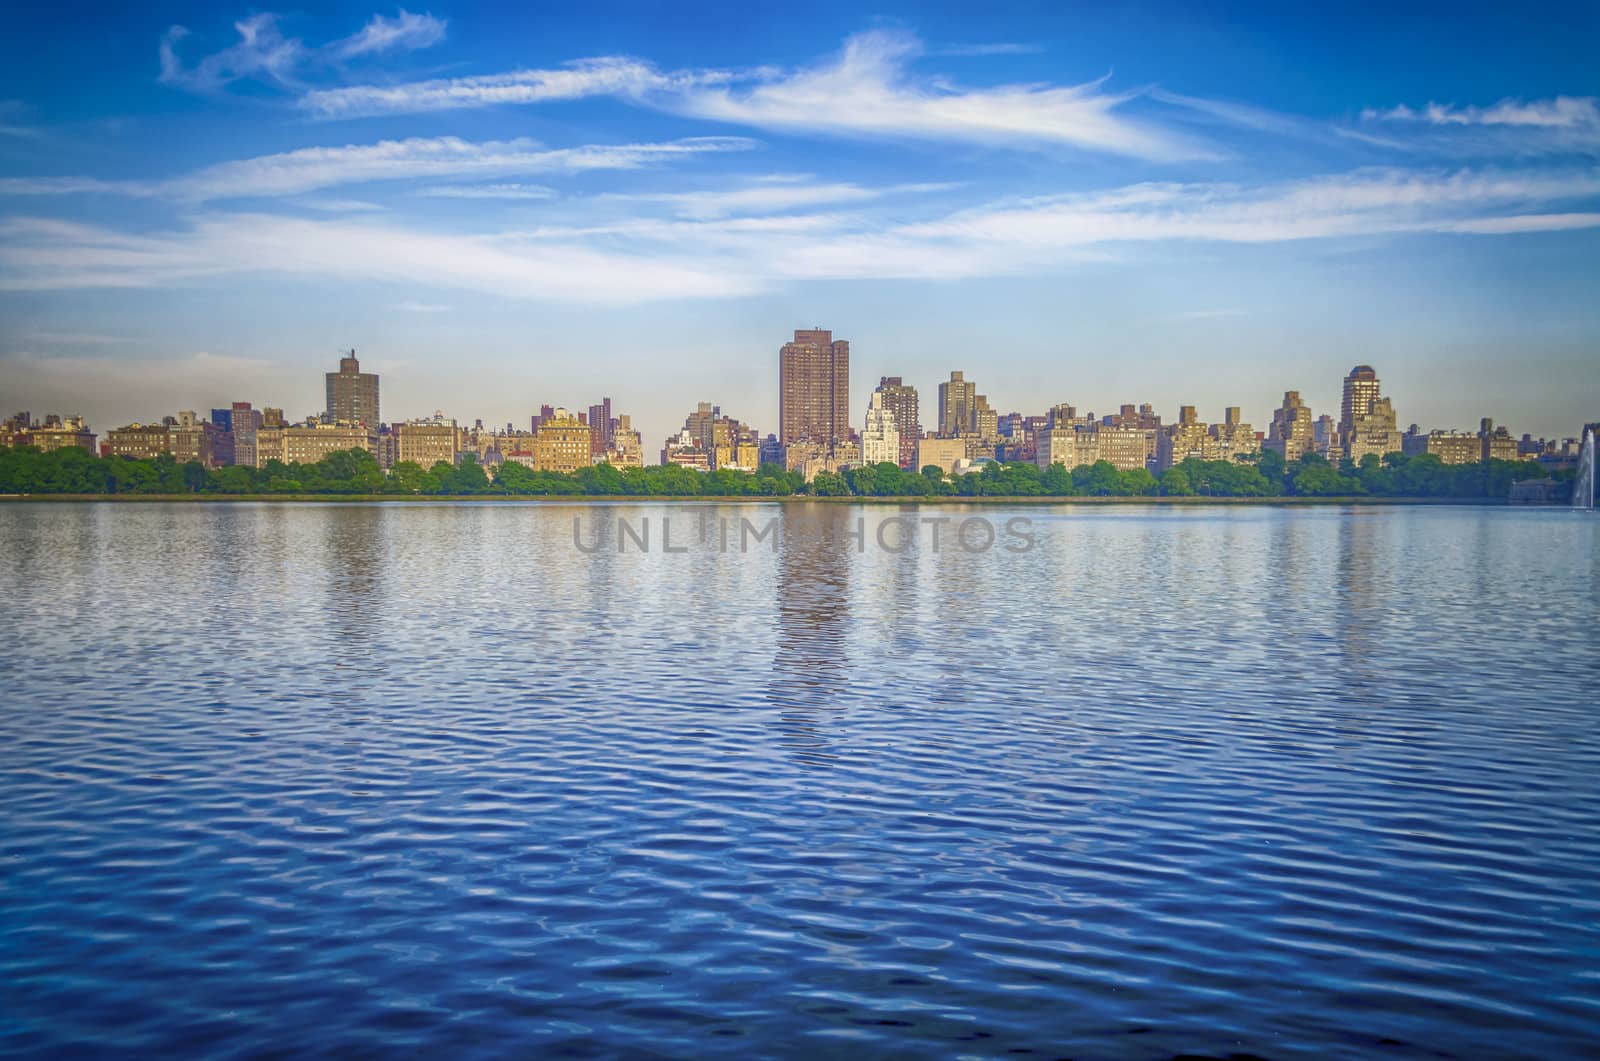 Reservoir in Central Park, New York by marcorubino